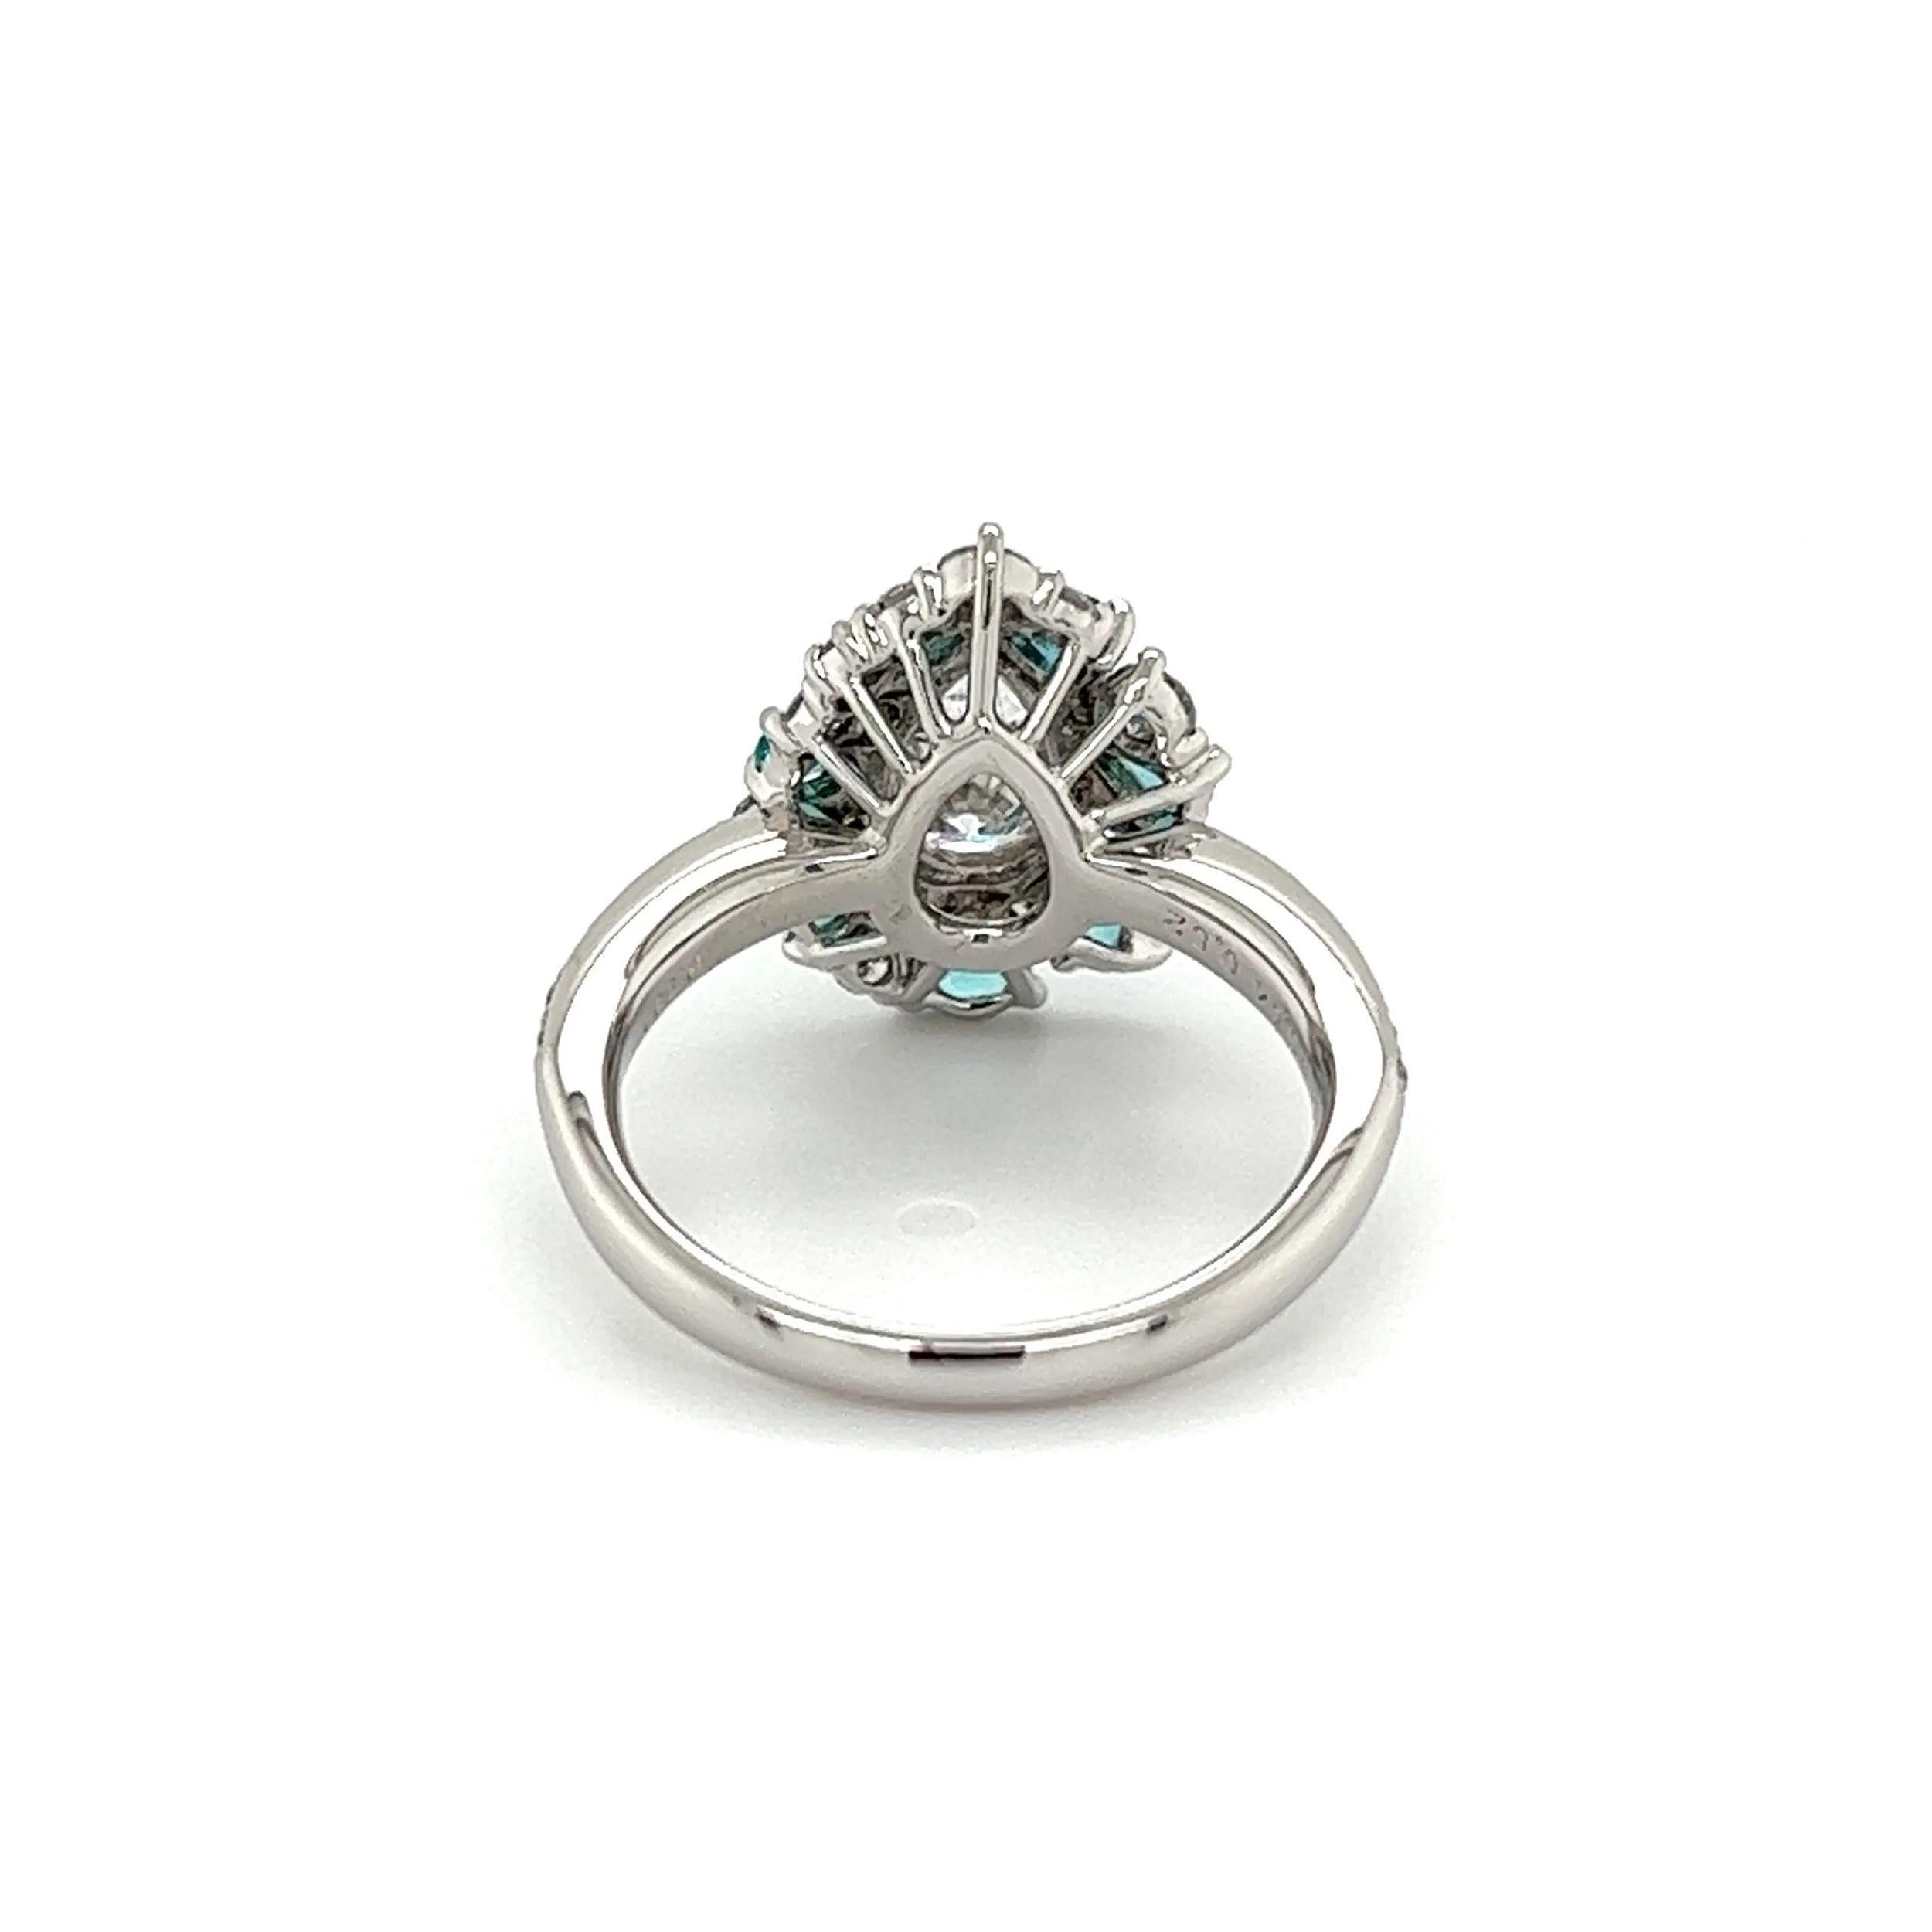 1.02 Carat Pear GIA Diamond & Paraiba Vintage Platinum Ring Estate Fine Jewelry In Excellent Condition For Sale In Montreal, QC